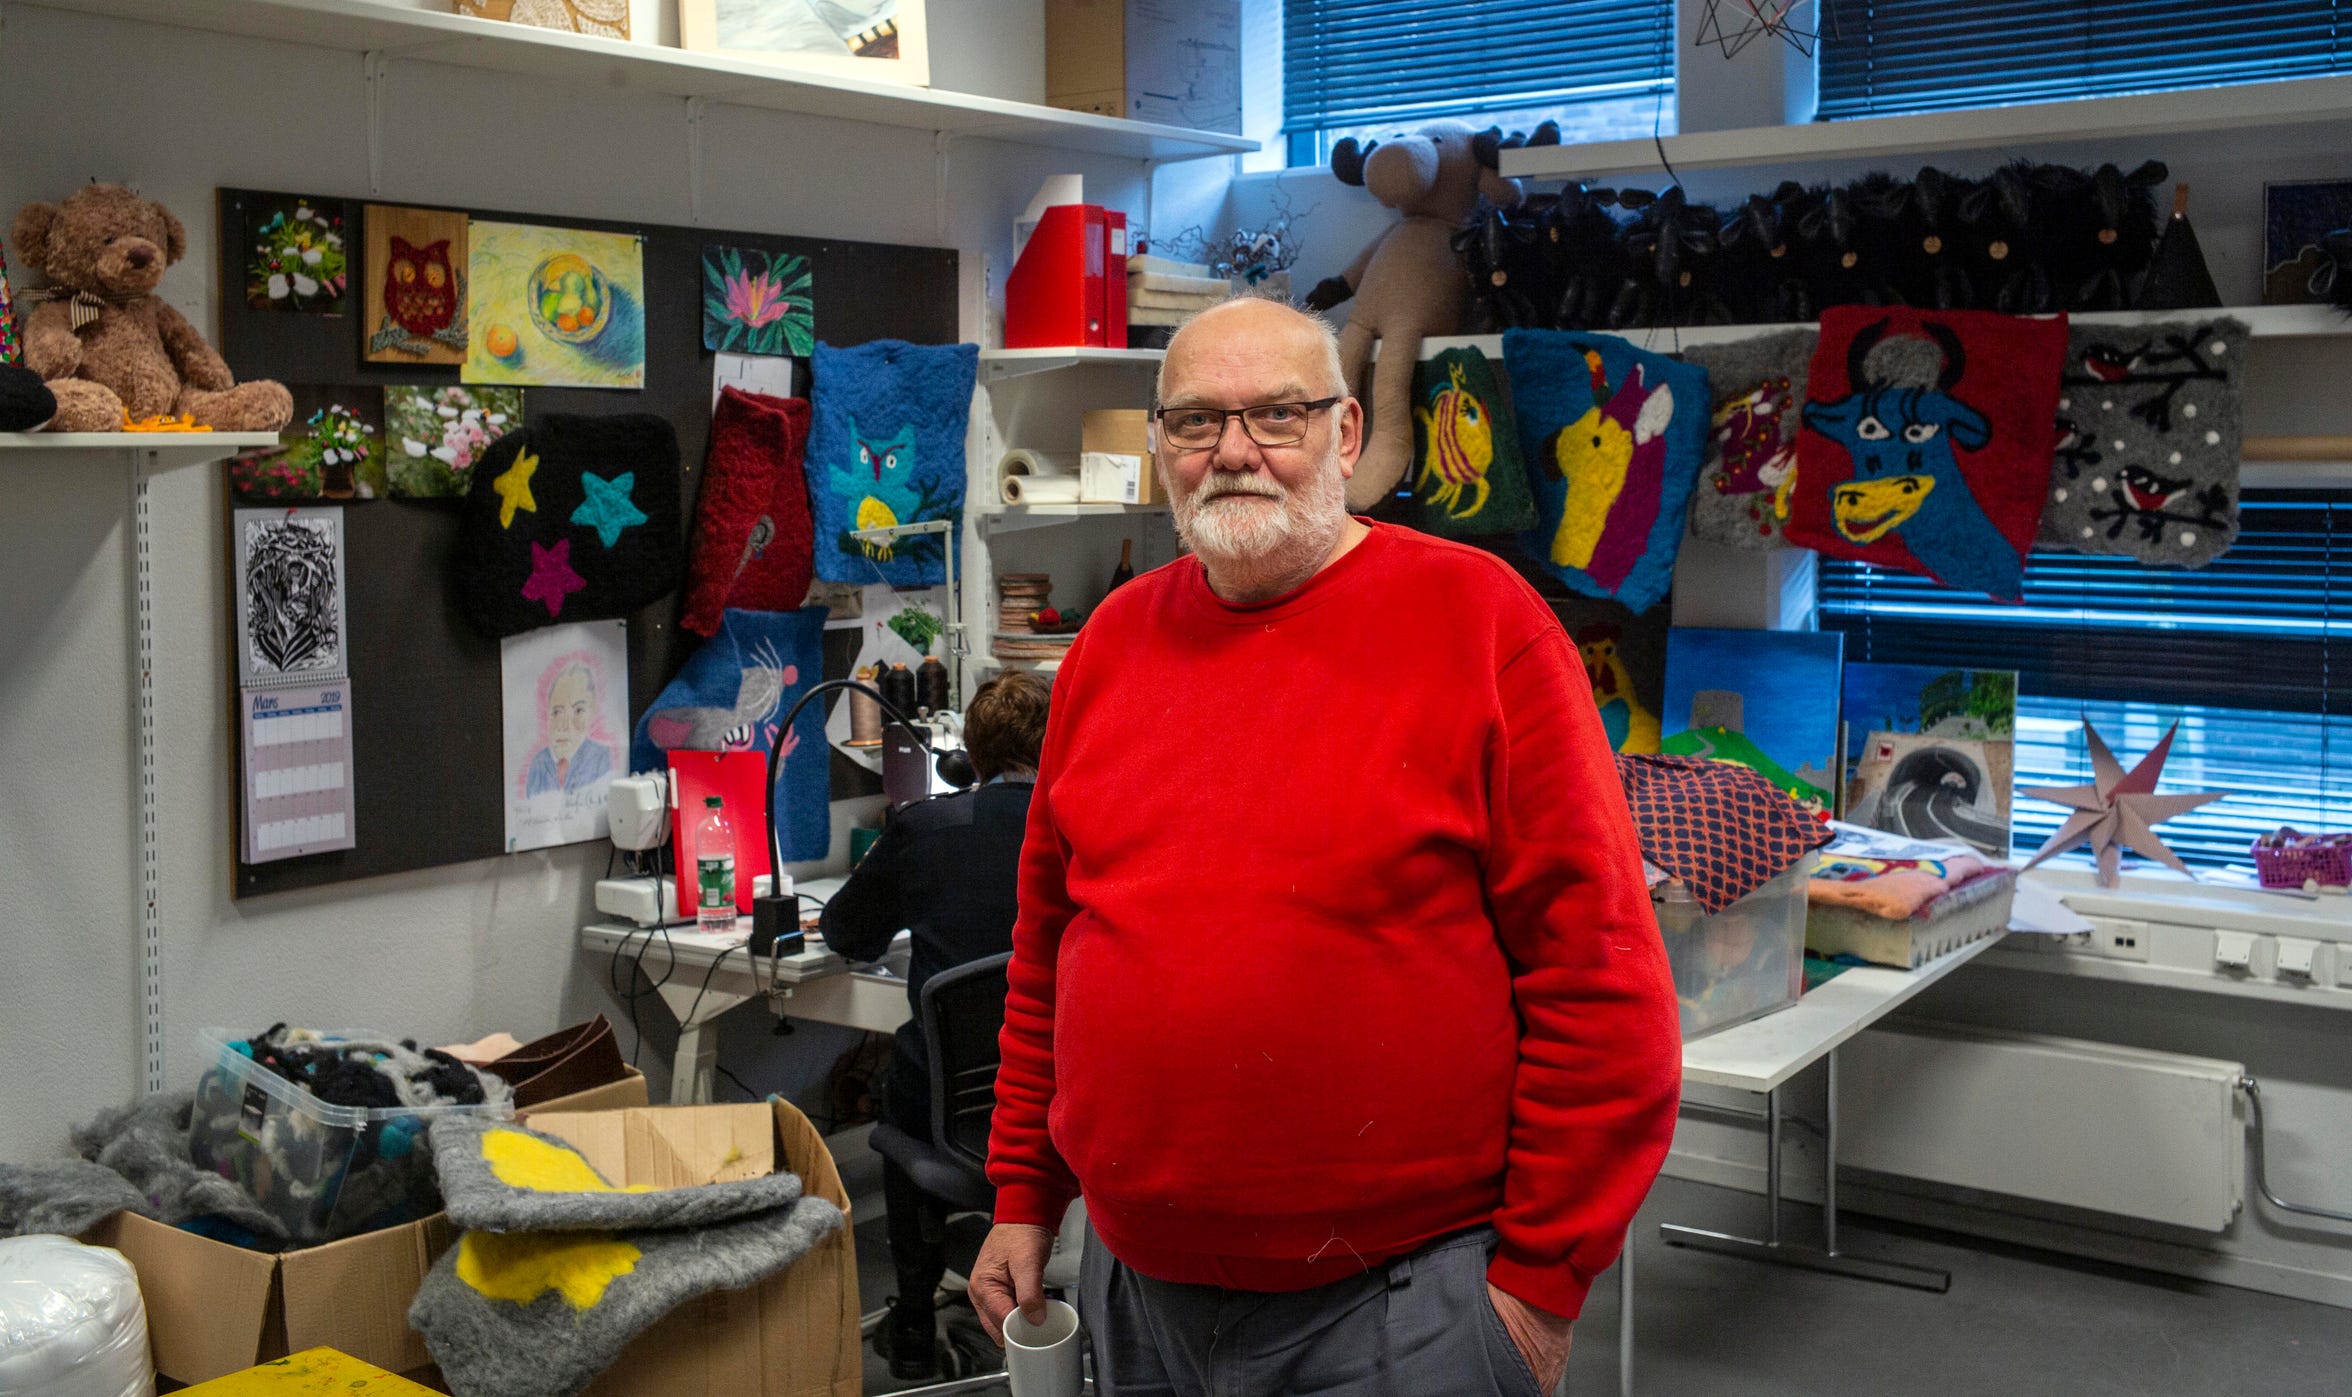 John Anders Braathen, 65, works in a textiles shop at Halden Prison in Norway. Products produced in the prison's textiles studio, print shop, art studios, wood shop and other learning centers can be purchased online at haldenfengselprodukter.no, a website produced by prisoners. 